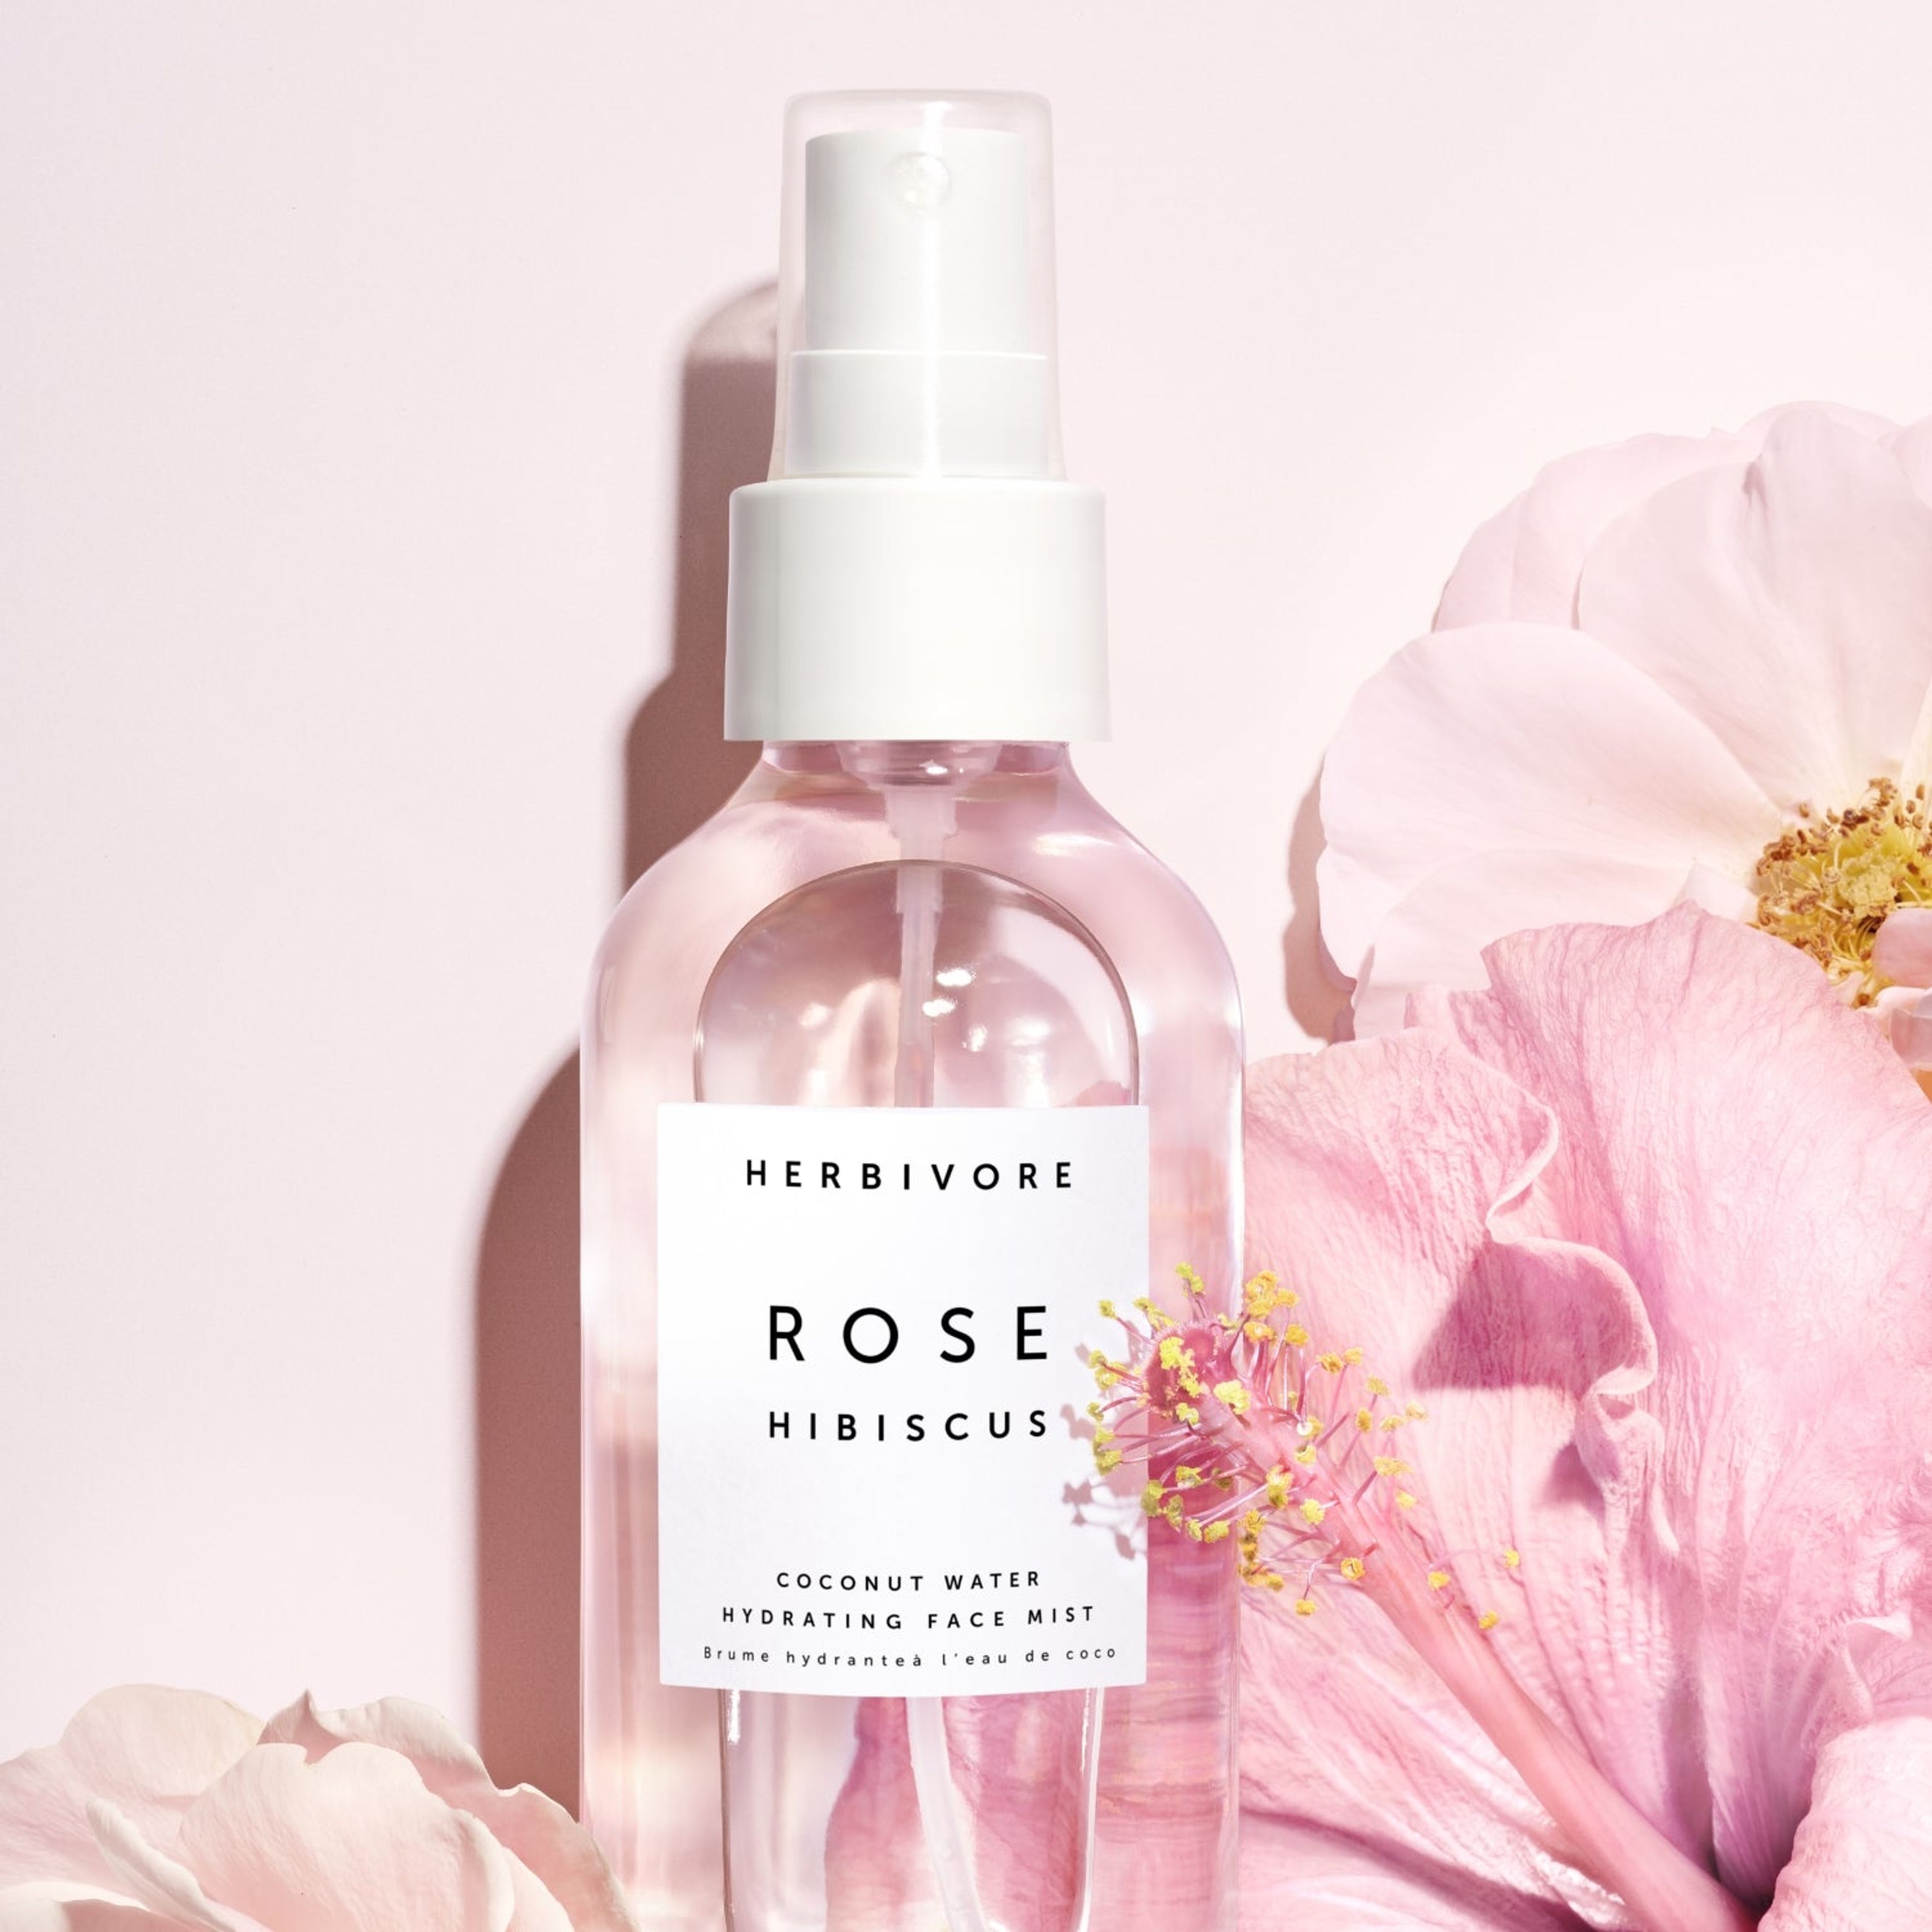 ROSE HIBISCUS Hydrating Face Mist